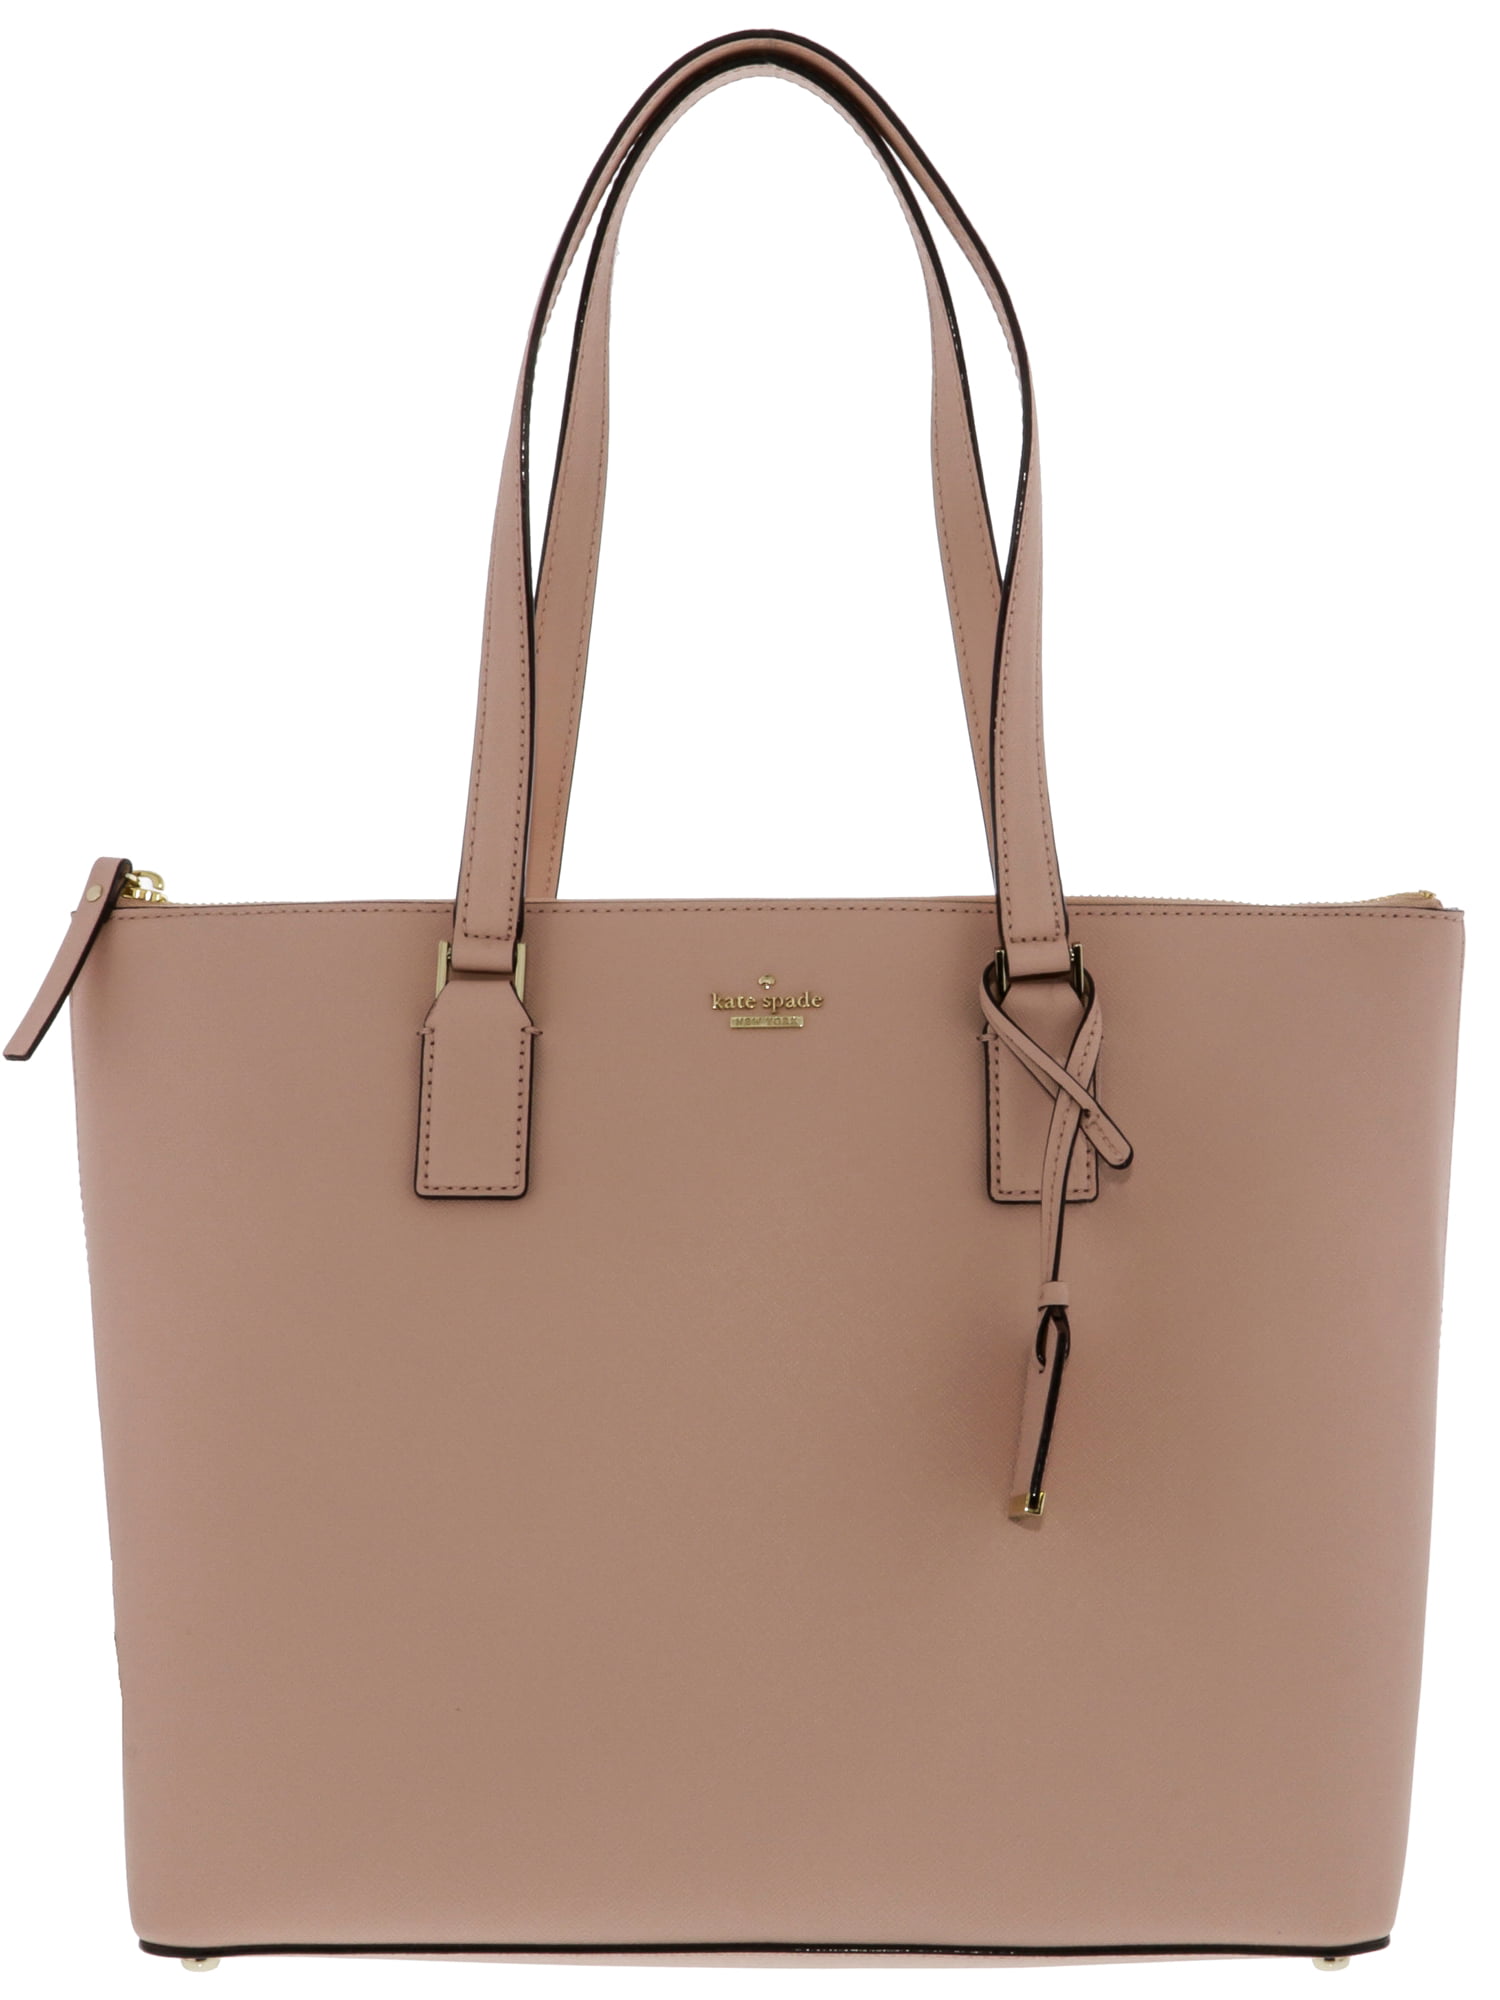 Kate Spade New York - Kate Spade Women's Cameron Street Lucie Leather ...